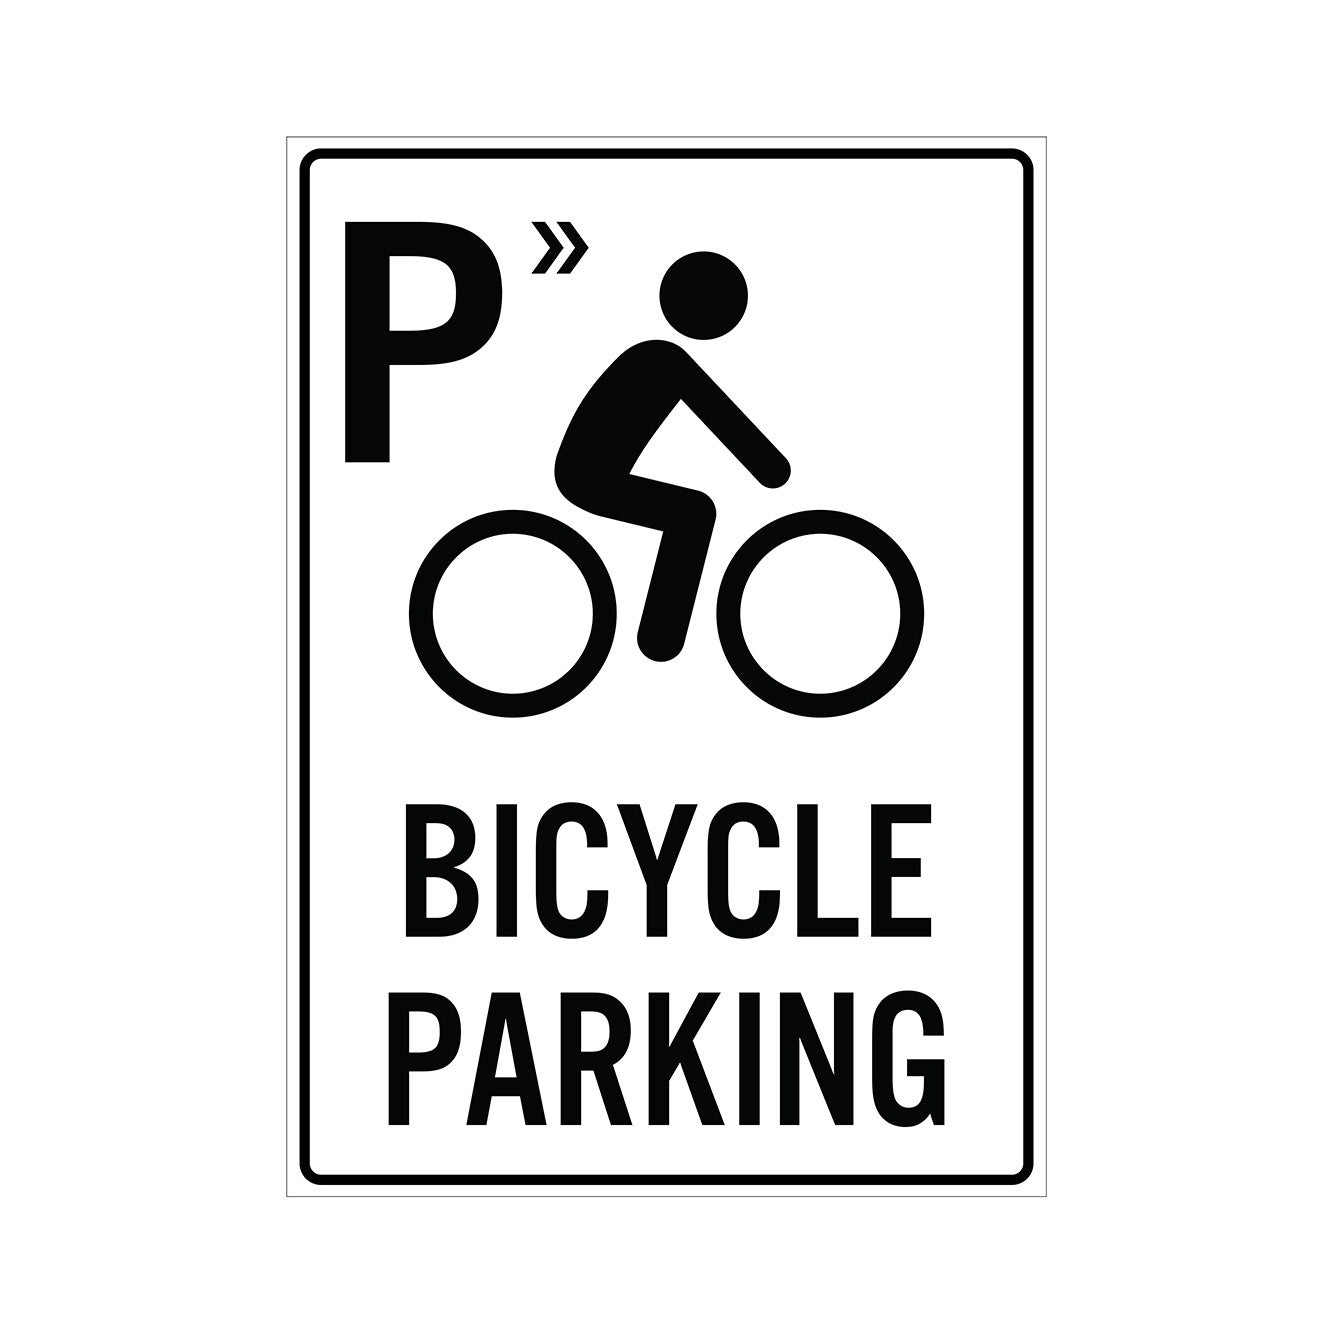 BICYCLE PARKING SIGN - Parking Sign